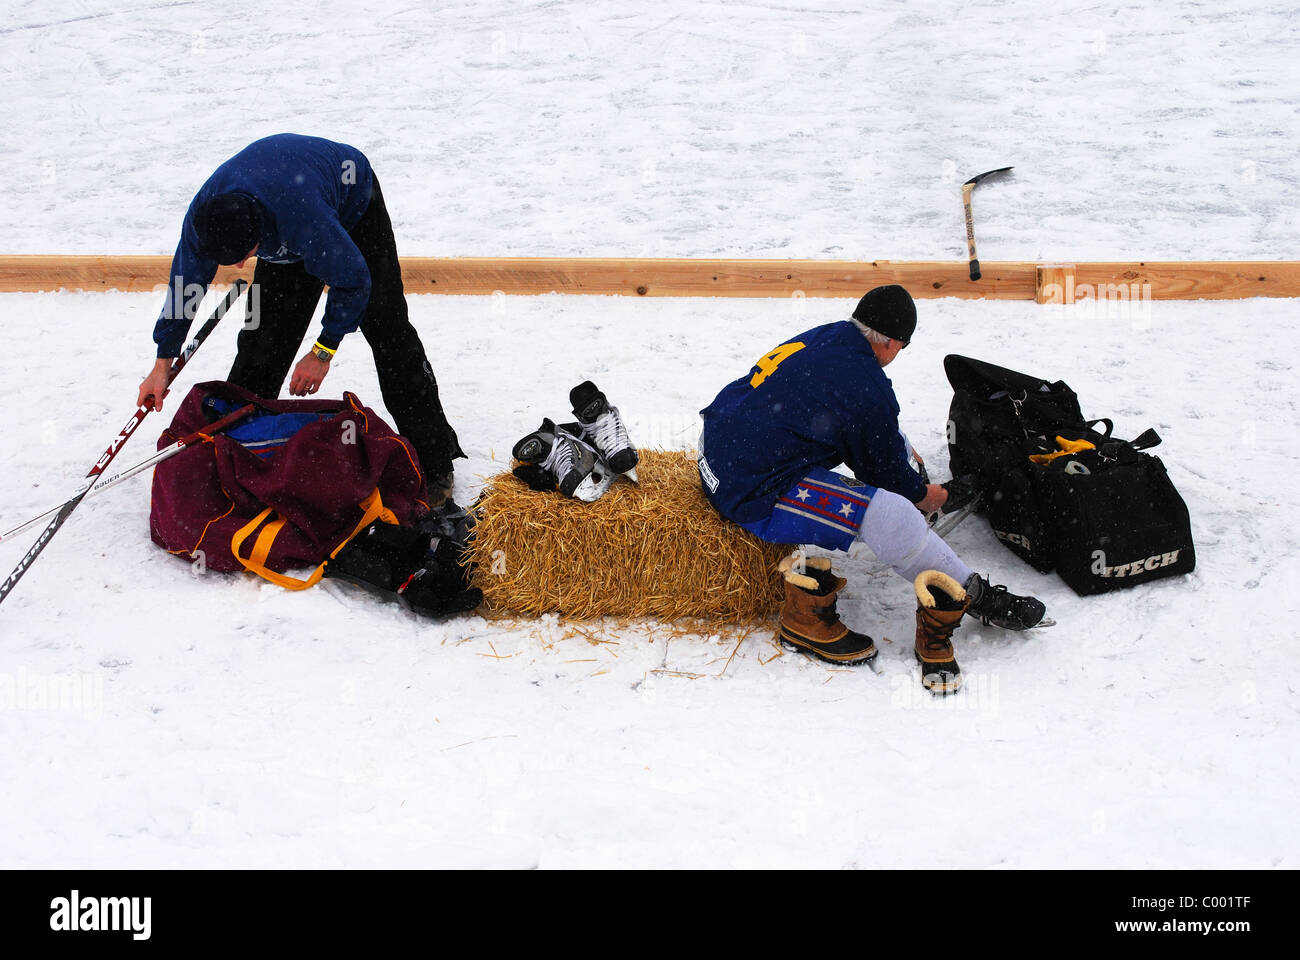 Players unpack hockey bag of gear at edge of outdoor ice rink. Stock Photo